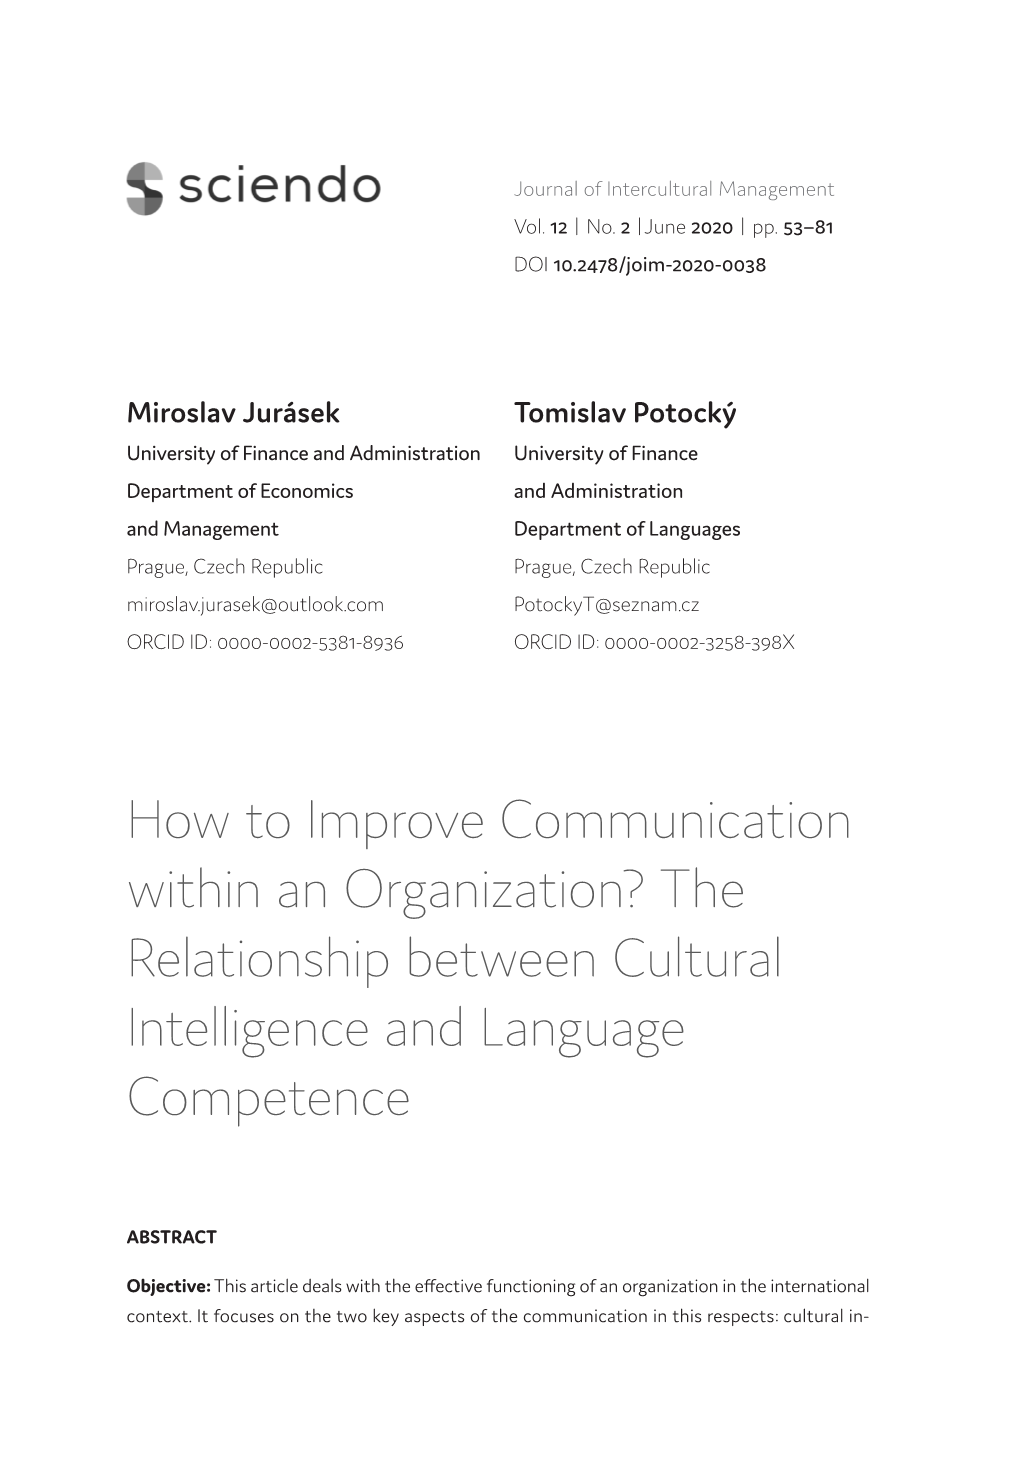 How to Improve Communication Within an Organization? the Relationship Between Cultural Intelligence and Language Competence